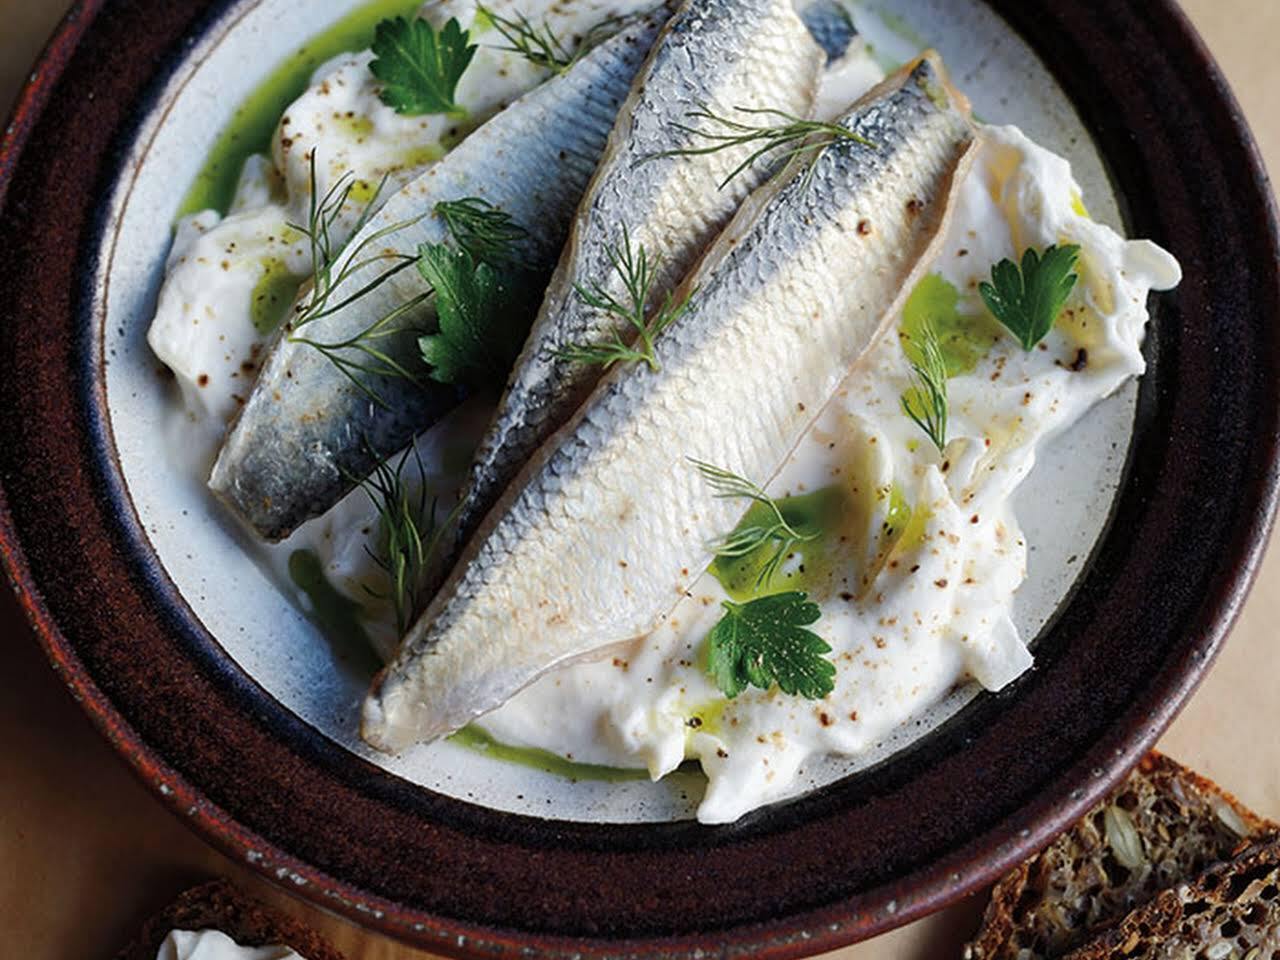 How to quickly clean herring